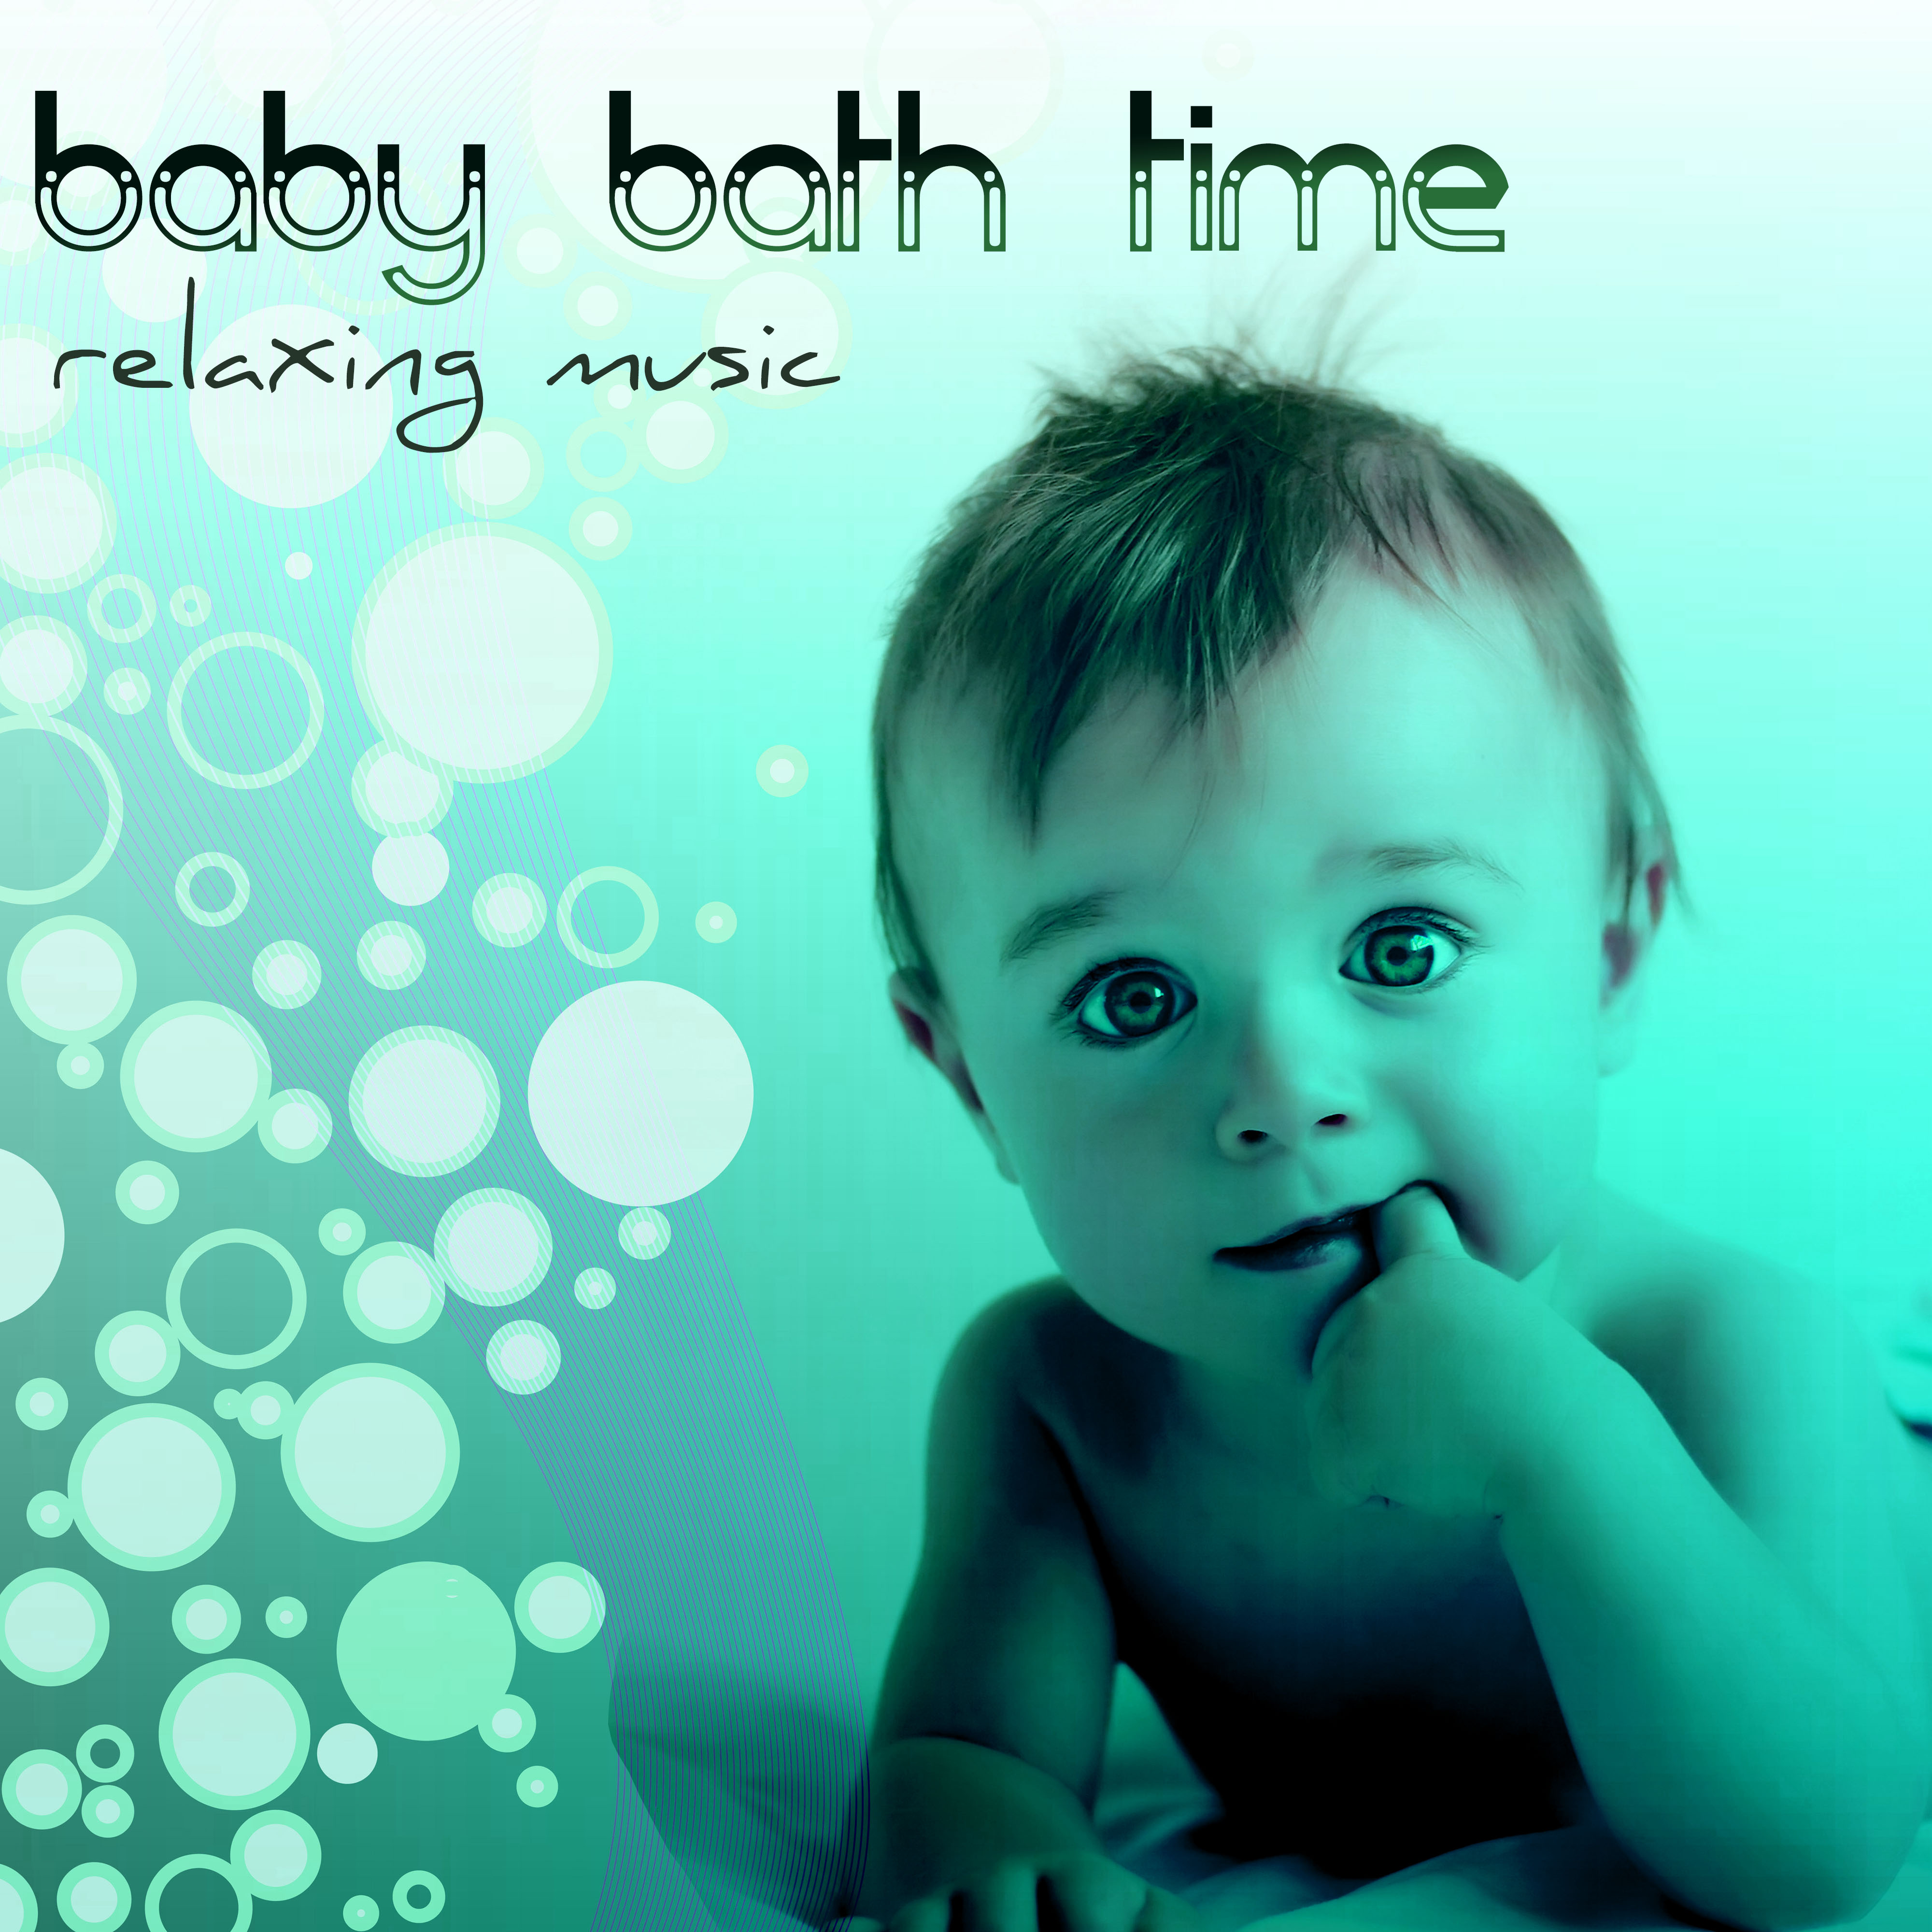 Baby Bath Time - Relaxing Music and Nature Sounds for Pure Relaxation